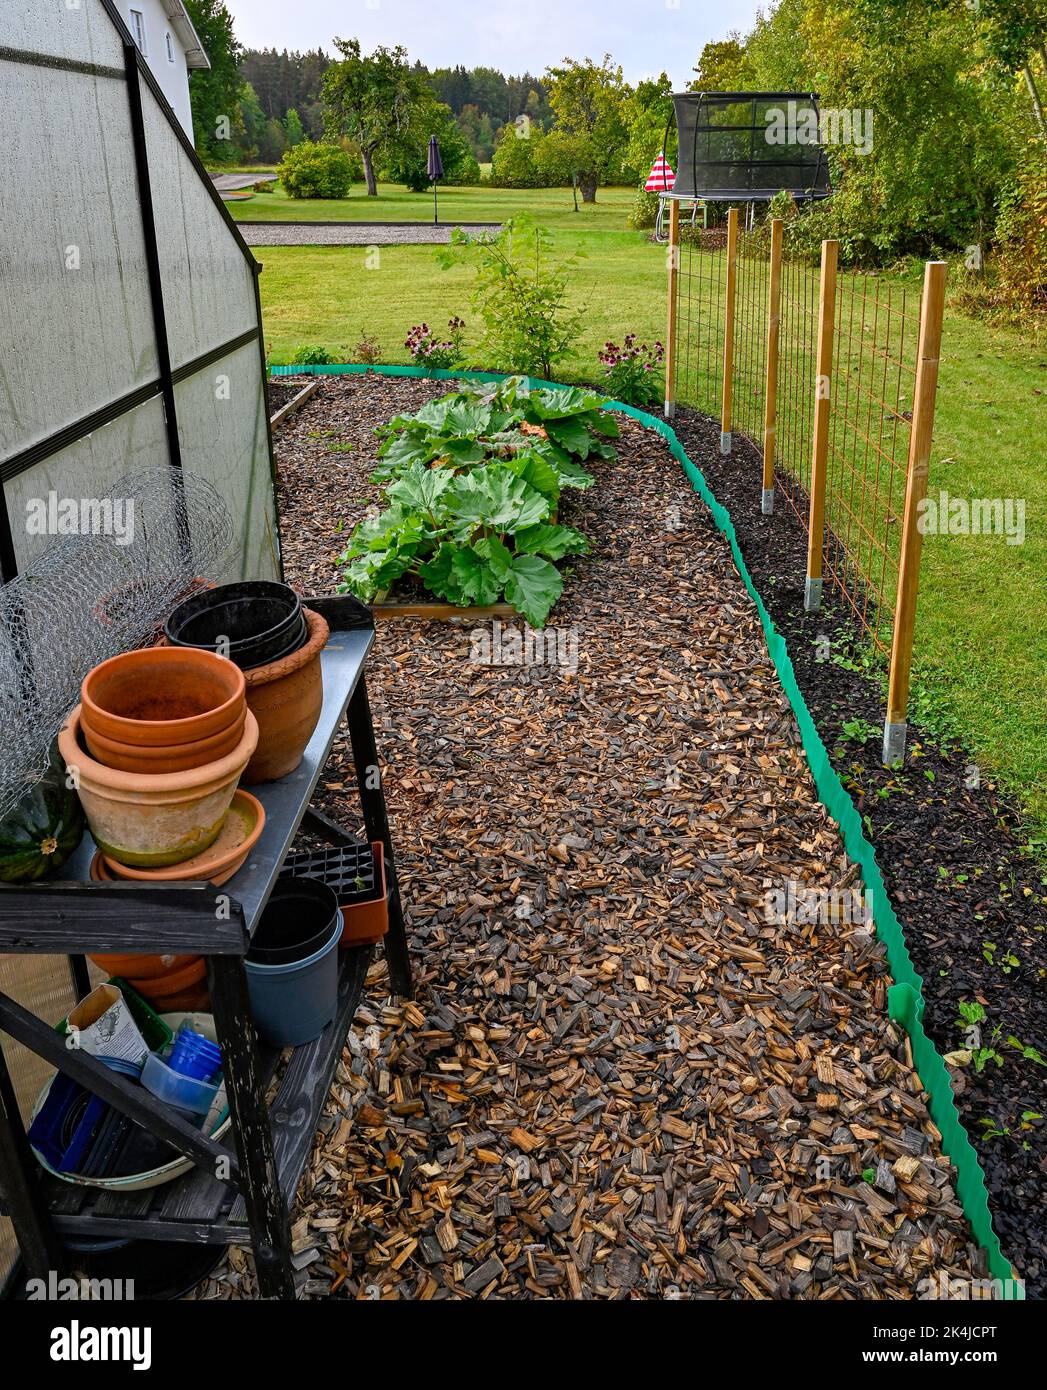 greenhouse and gardening table in cultivating area Stock Photo